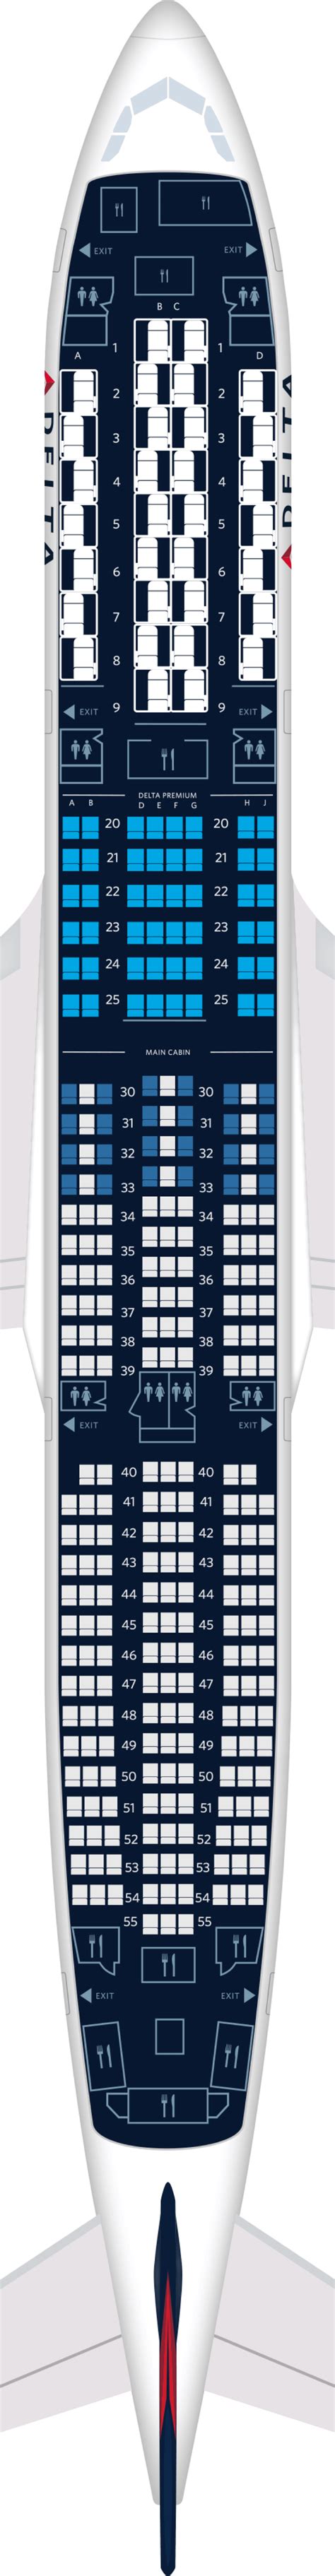 How To Change Seats On Delta Website Elcho Table